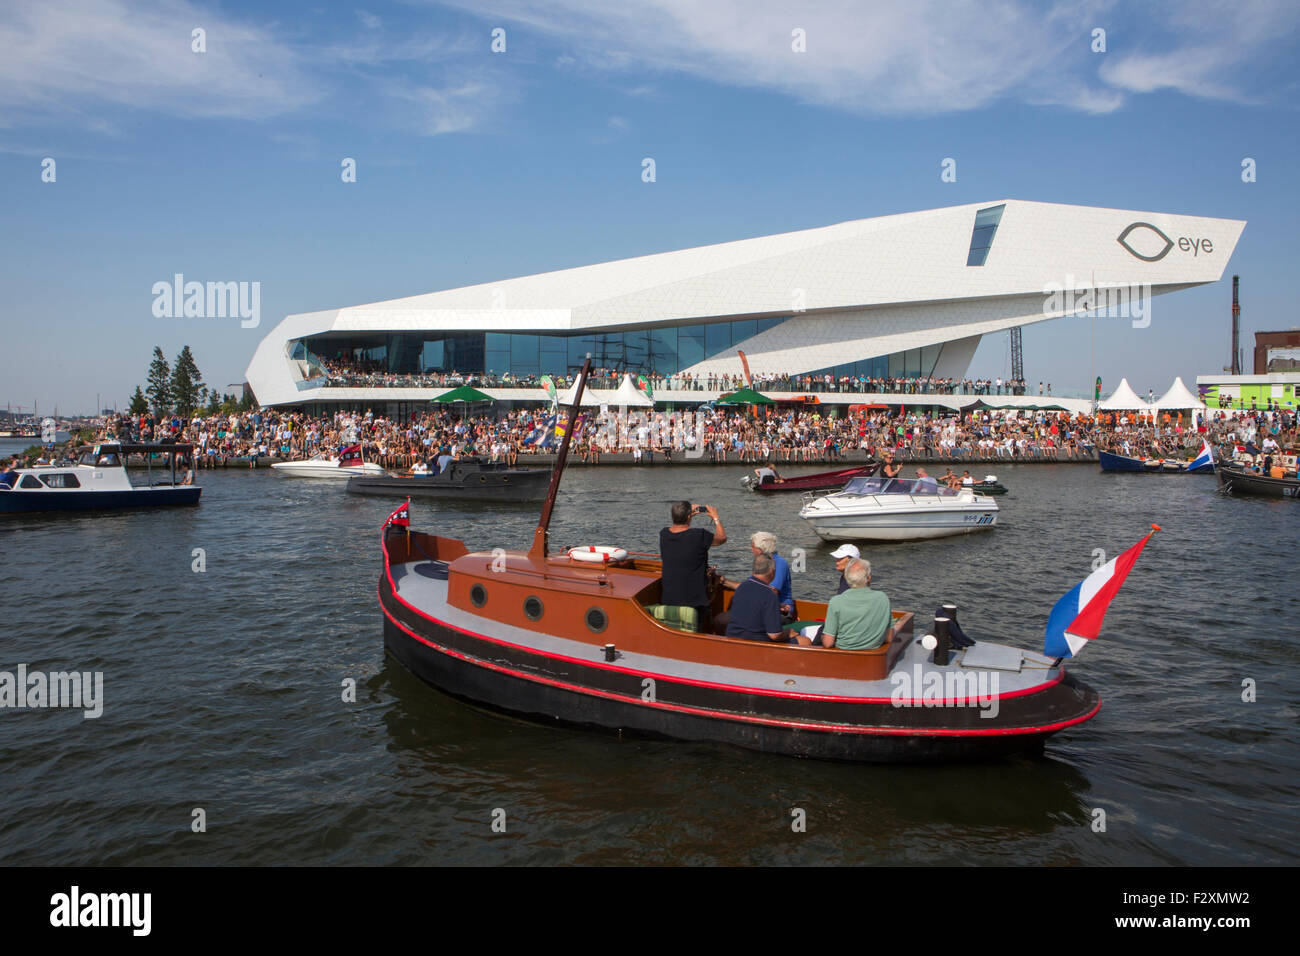 Boats at the Amsterdam canals during the 5 yearly Sail in 2015. in The background is cinema 'EYE' Stock Photo